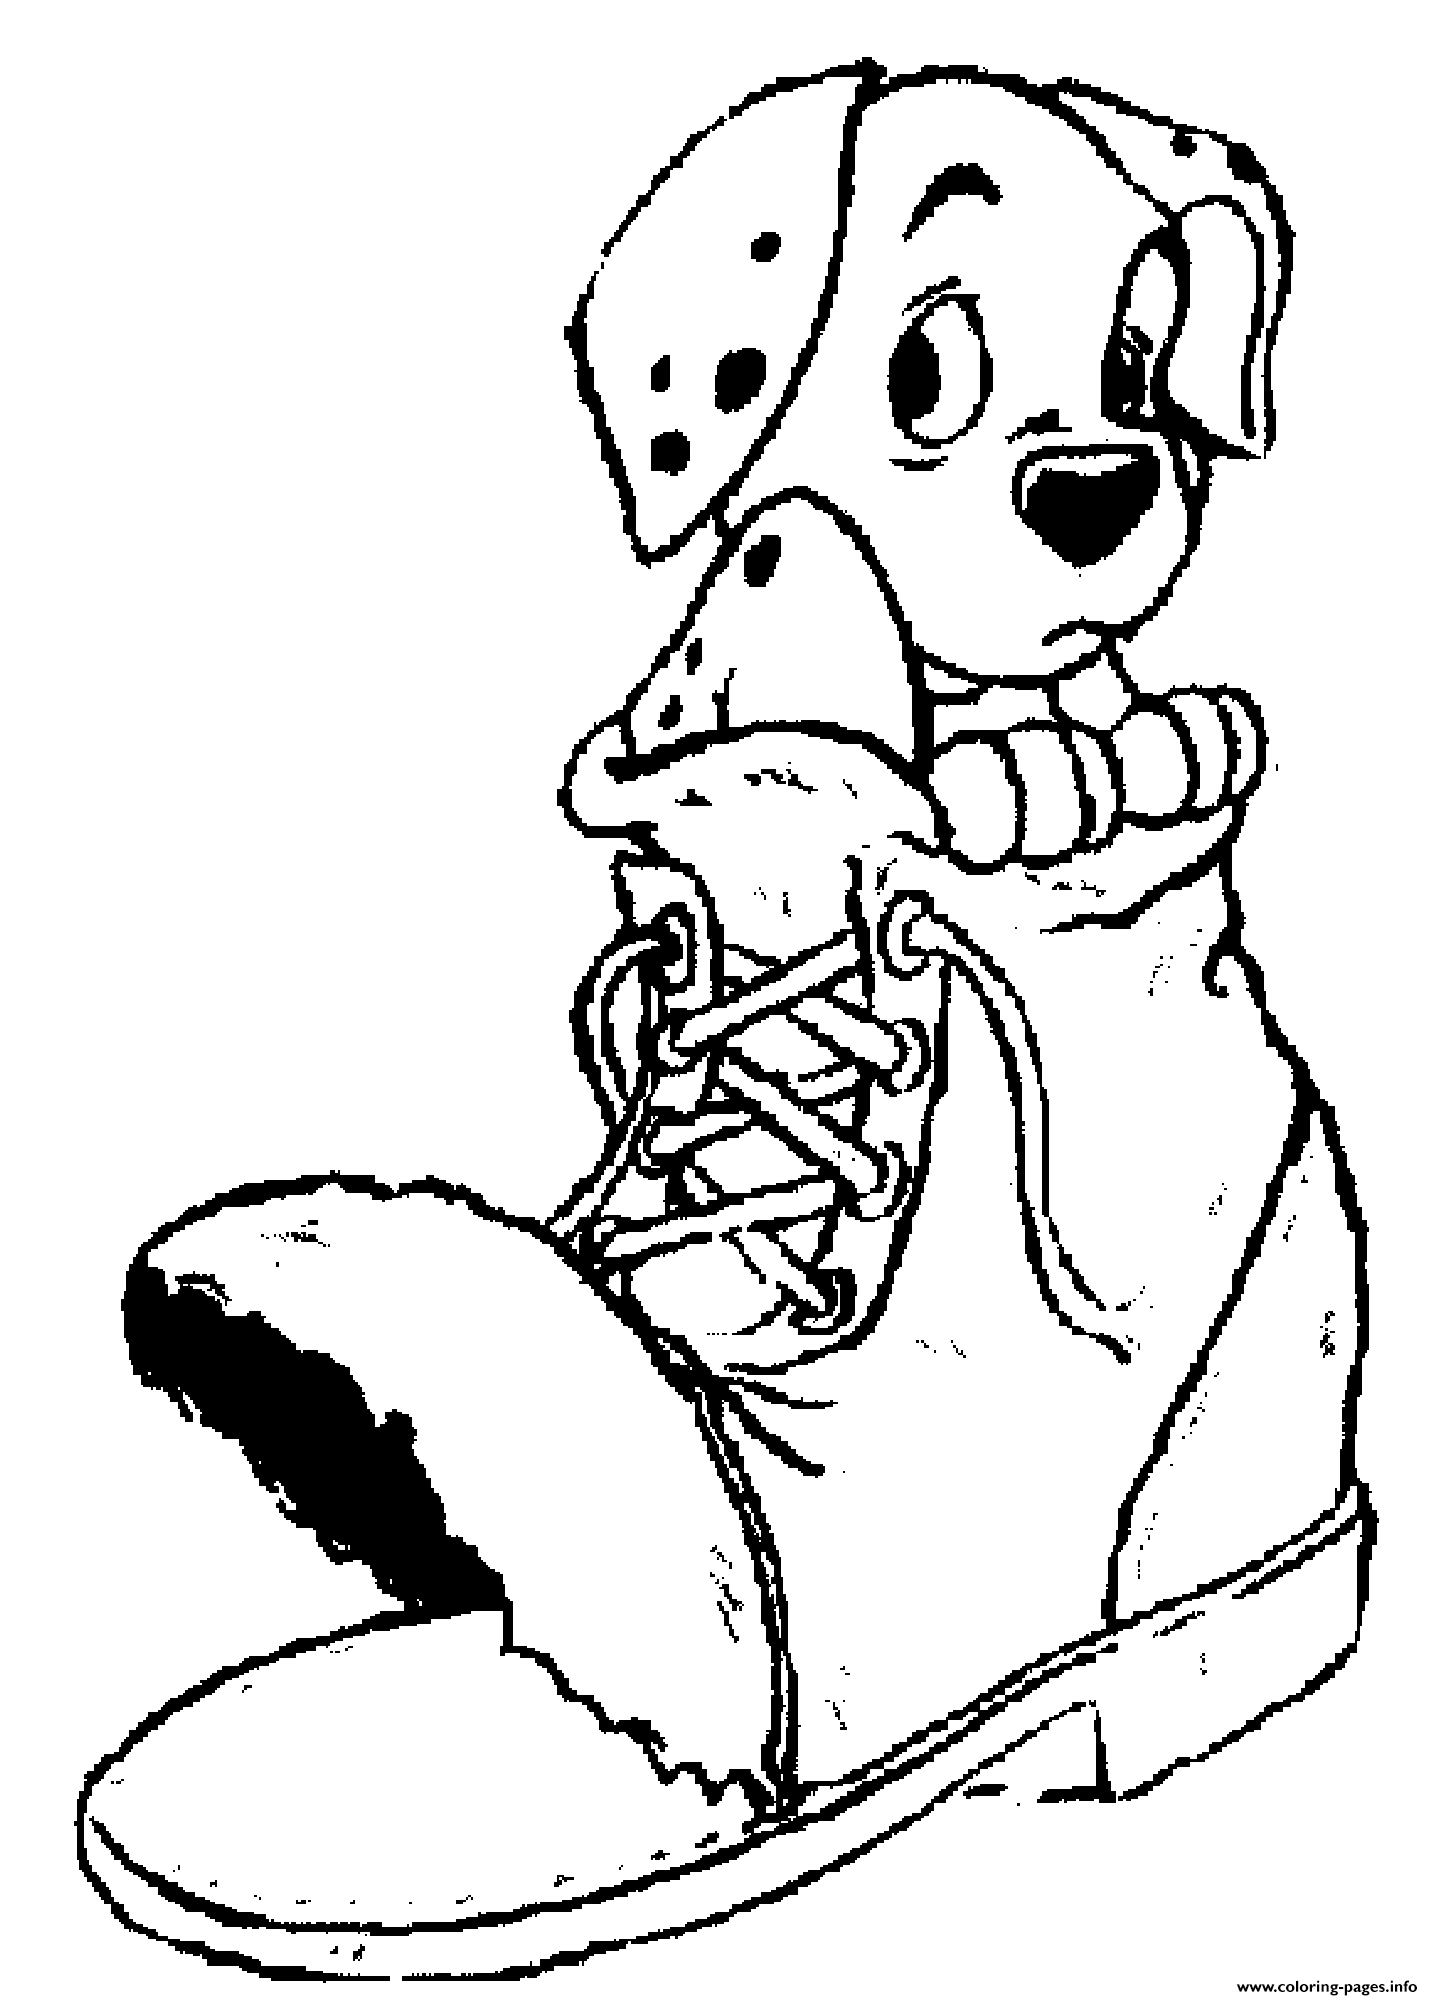 Dalmatian In A Boot Ee8d coloring